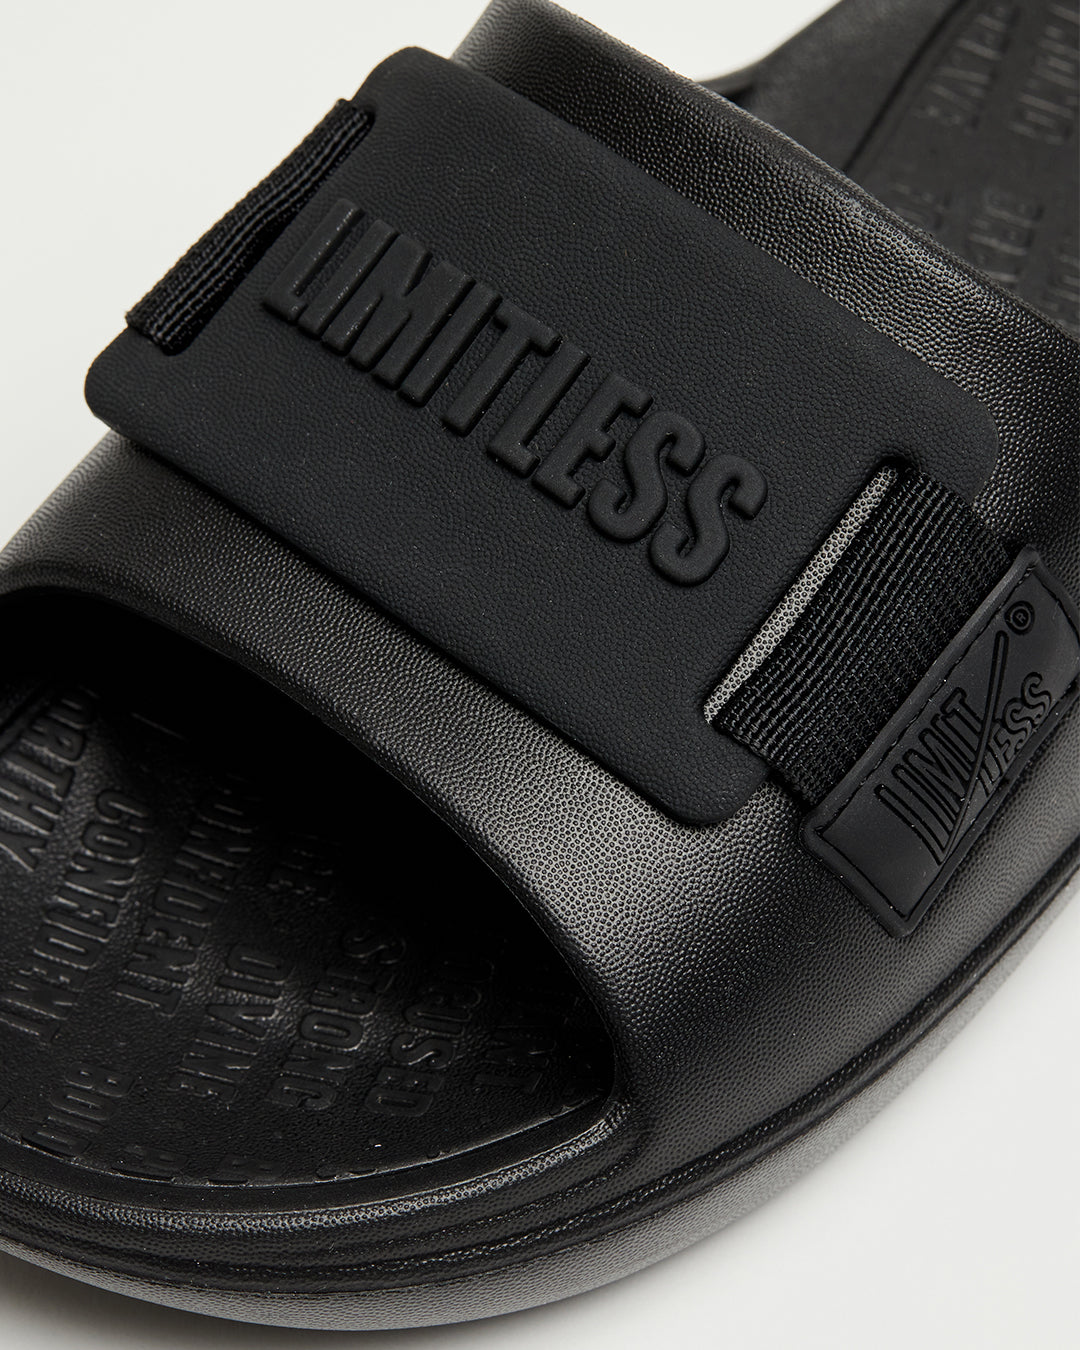 LIMITLESS SLIDES™ WITH ESSENTIAL TIBAH™ QUAD - RAYMORE PECULIAR HIGH SCHOOL EDITION